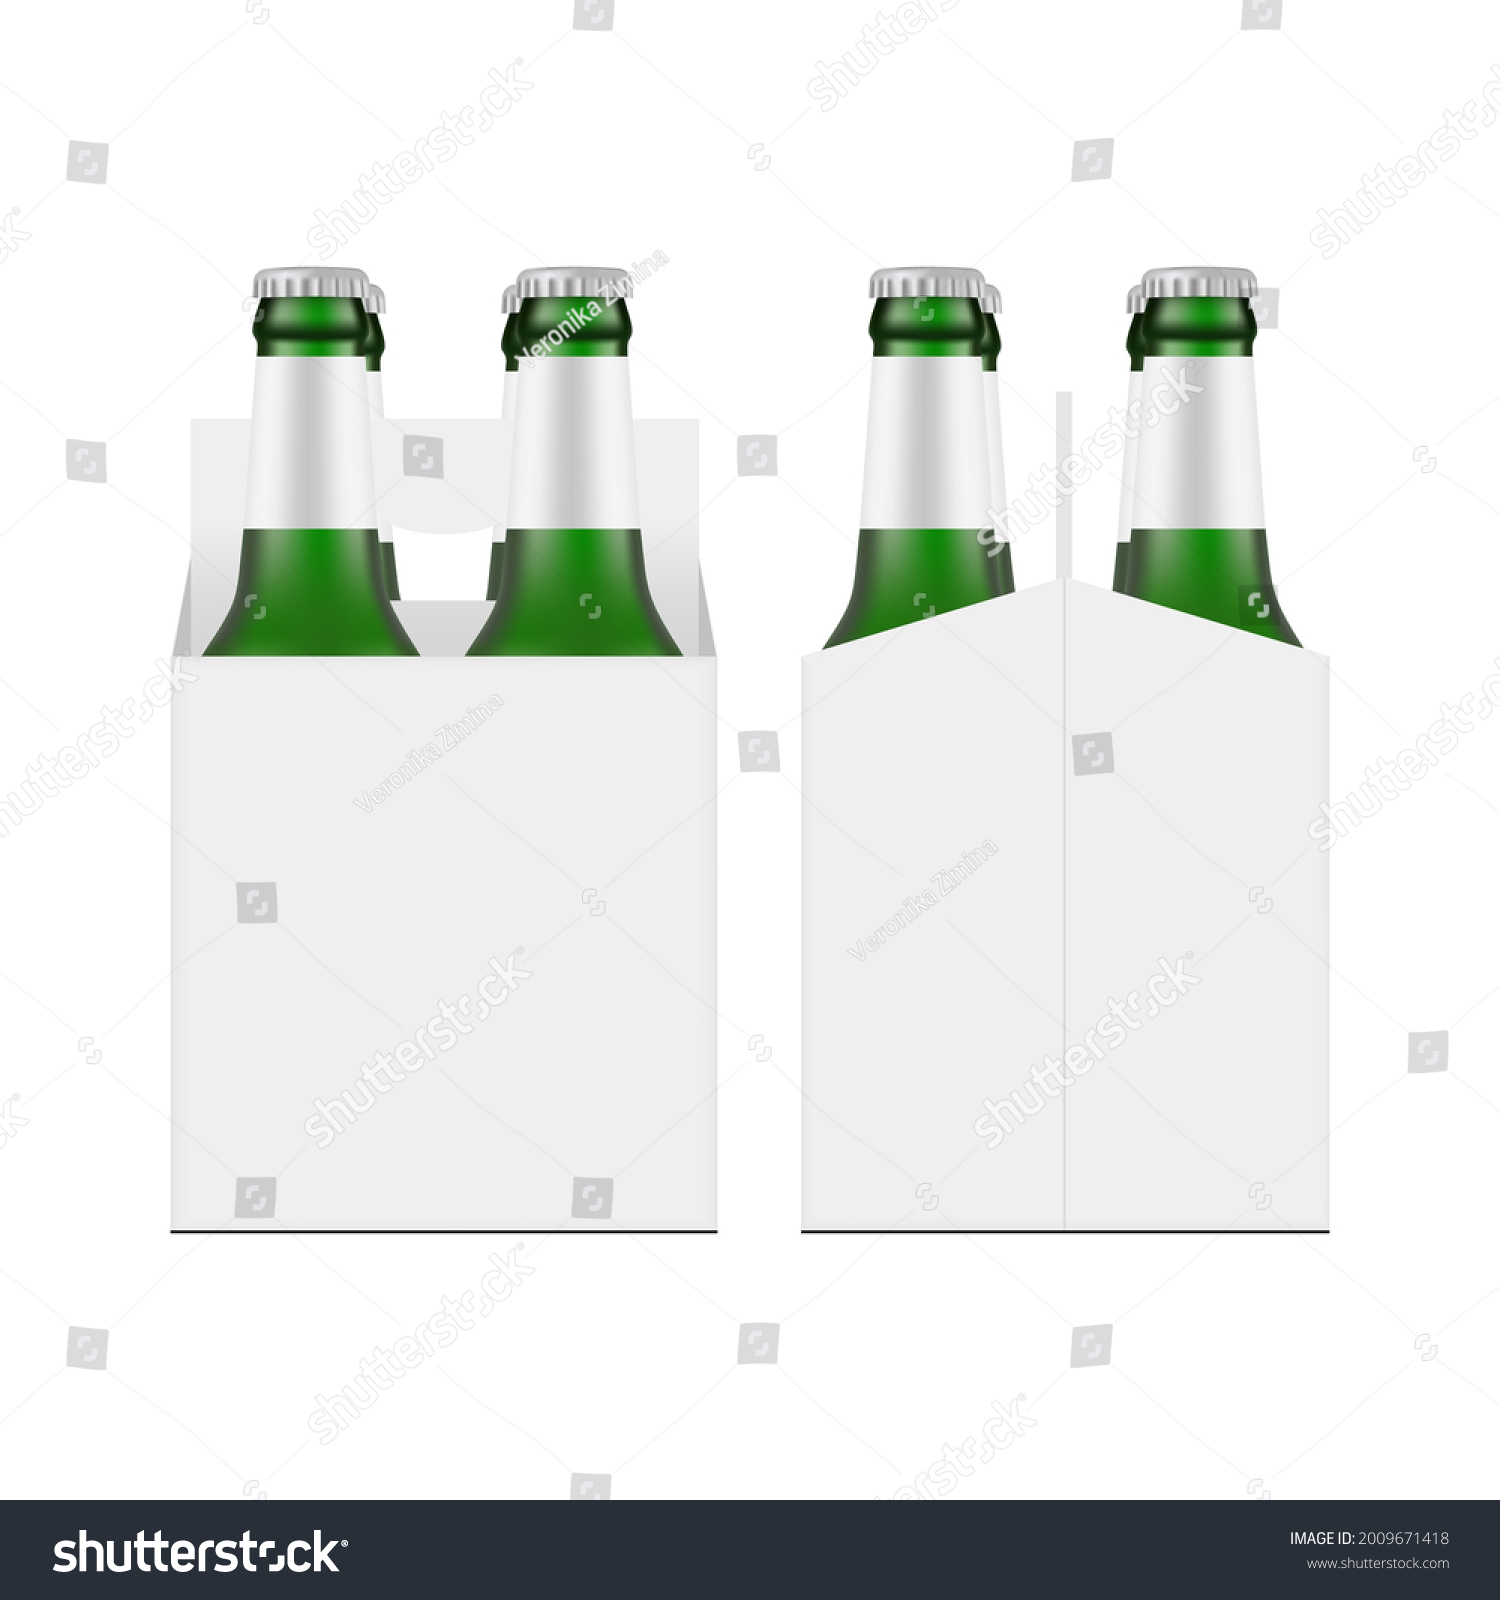 SVG of Carrier Box Mockup with Green Glass Beer Bottles, Front and Side View, Isolated on White Background. Vector Illustration svg